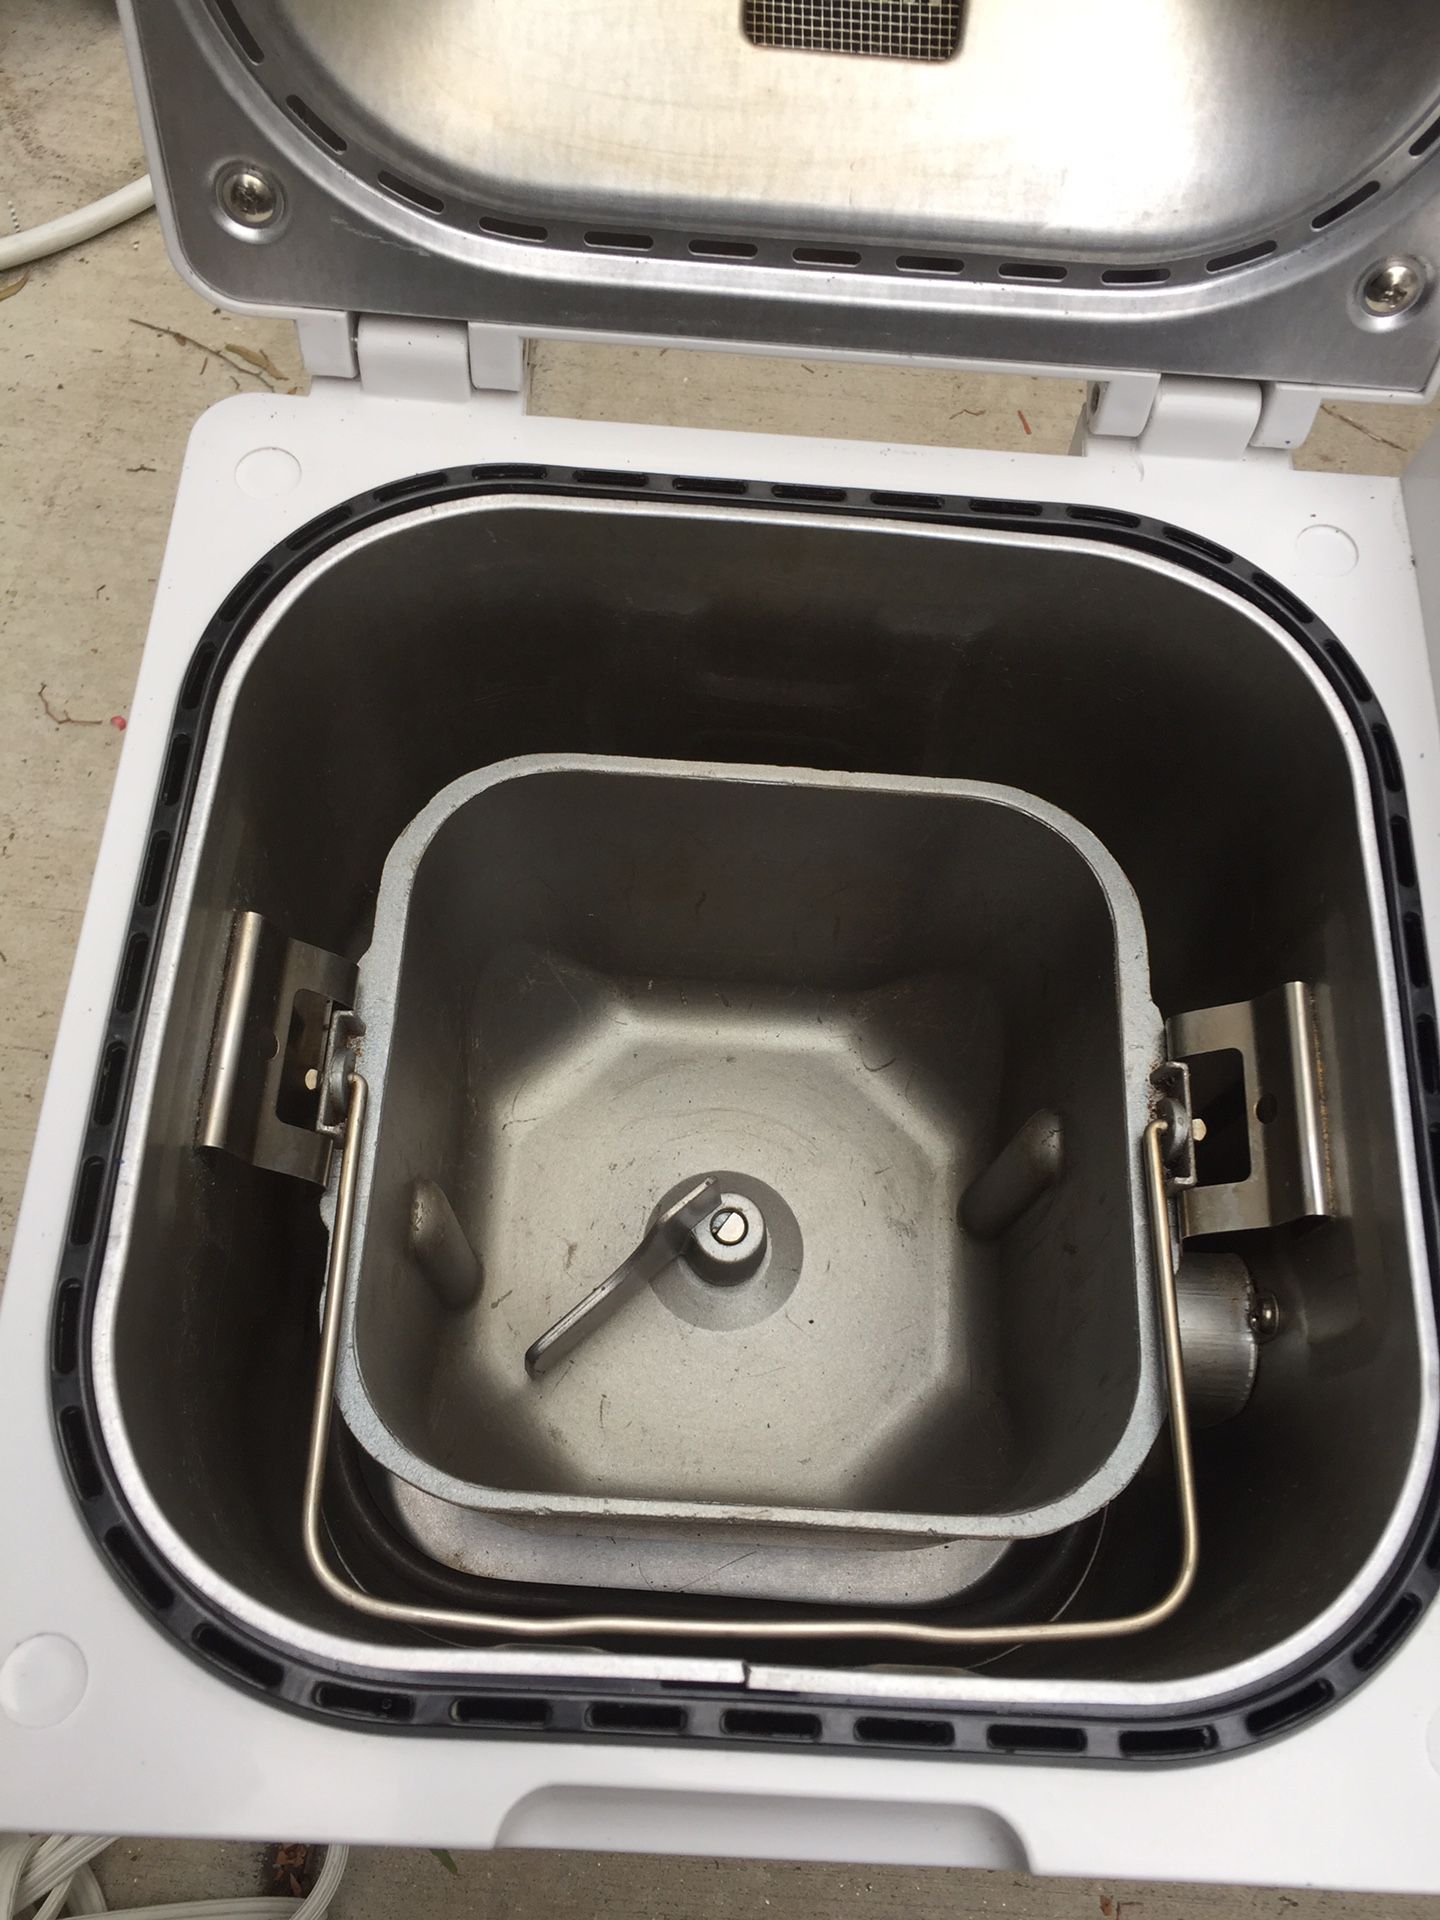 Oster Bread Maker in great working condition